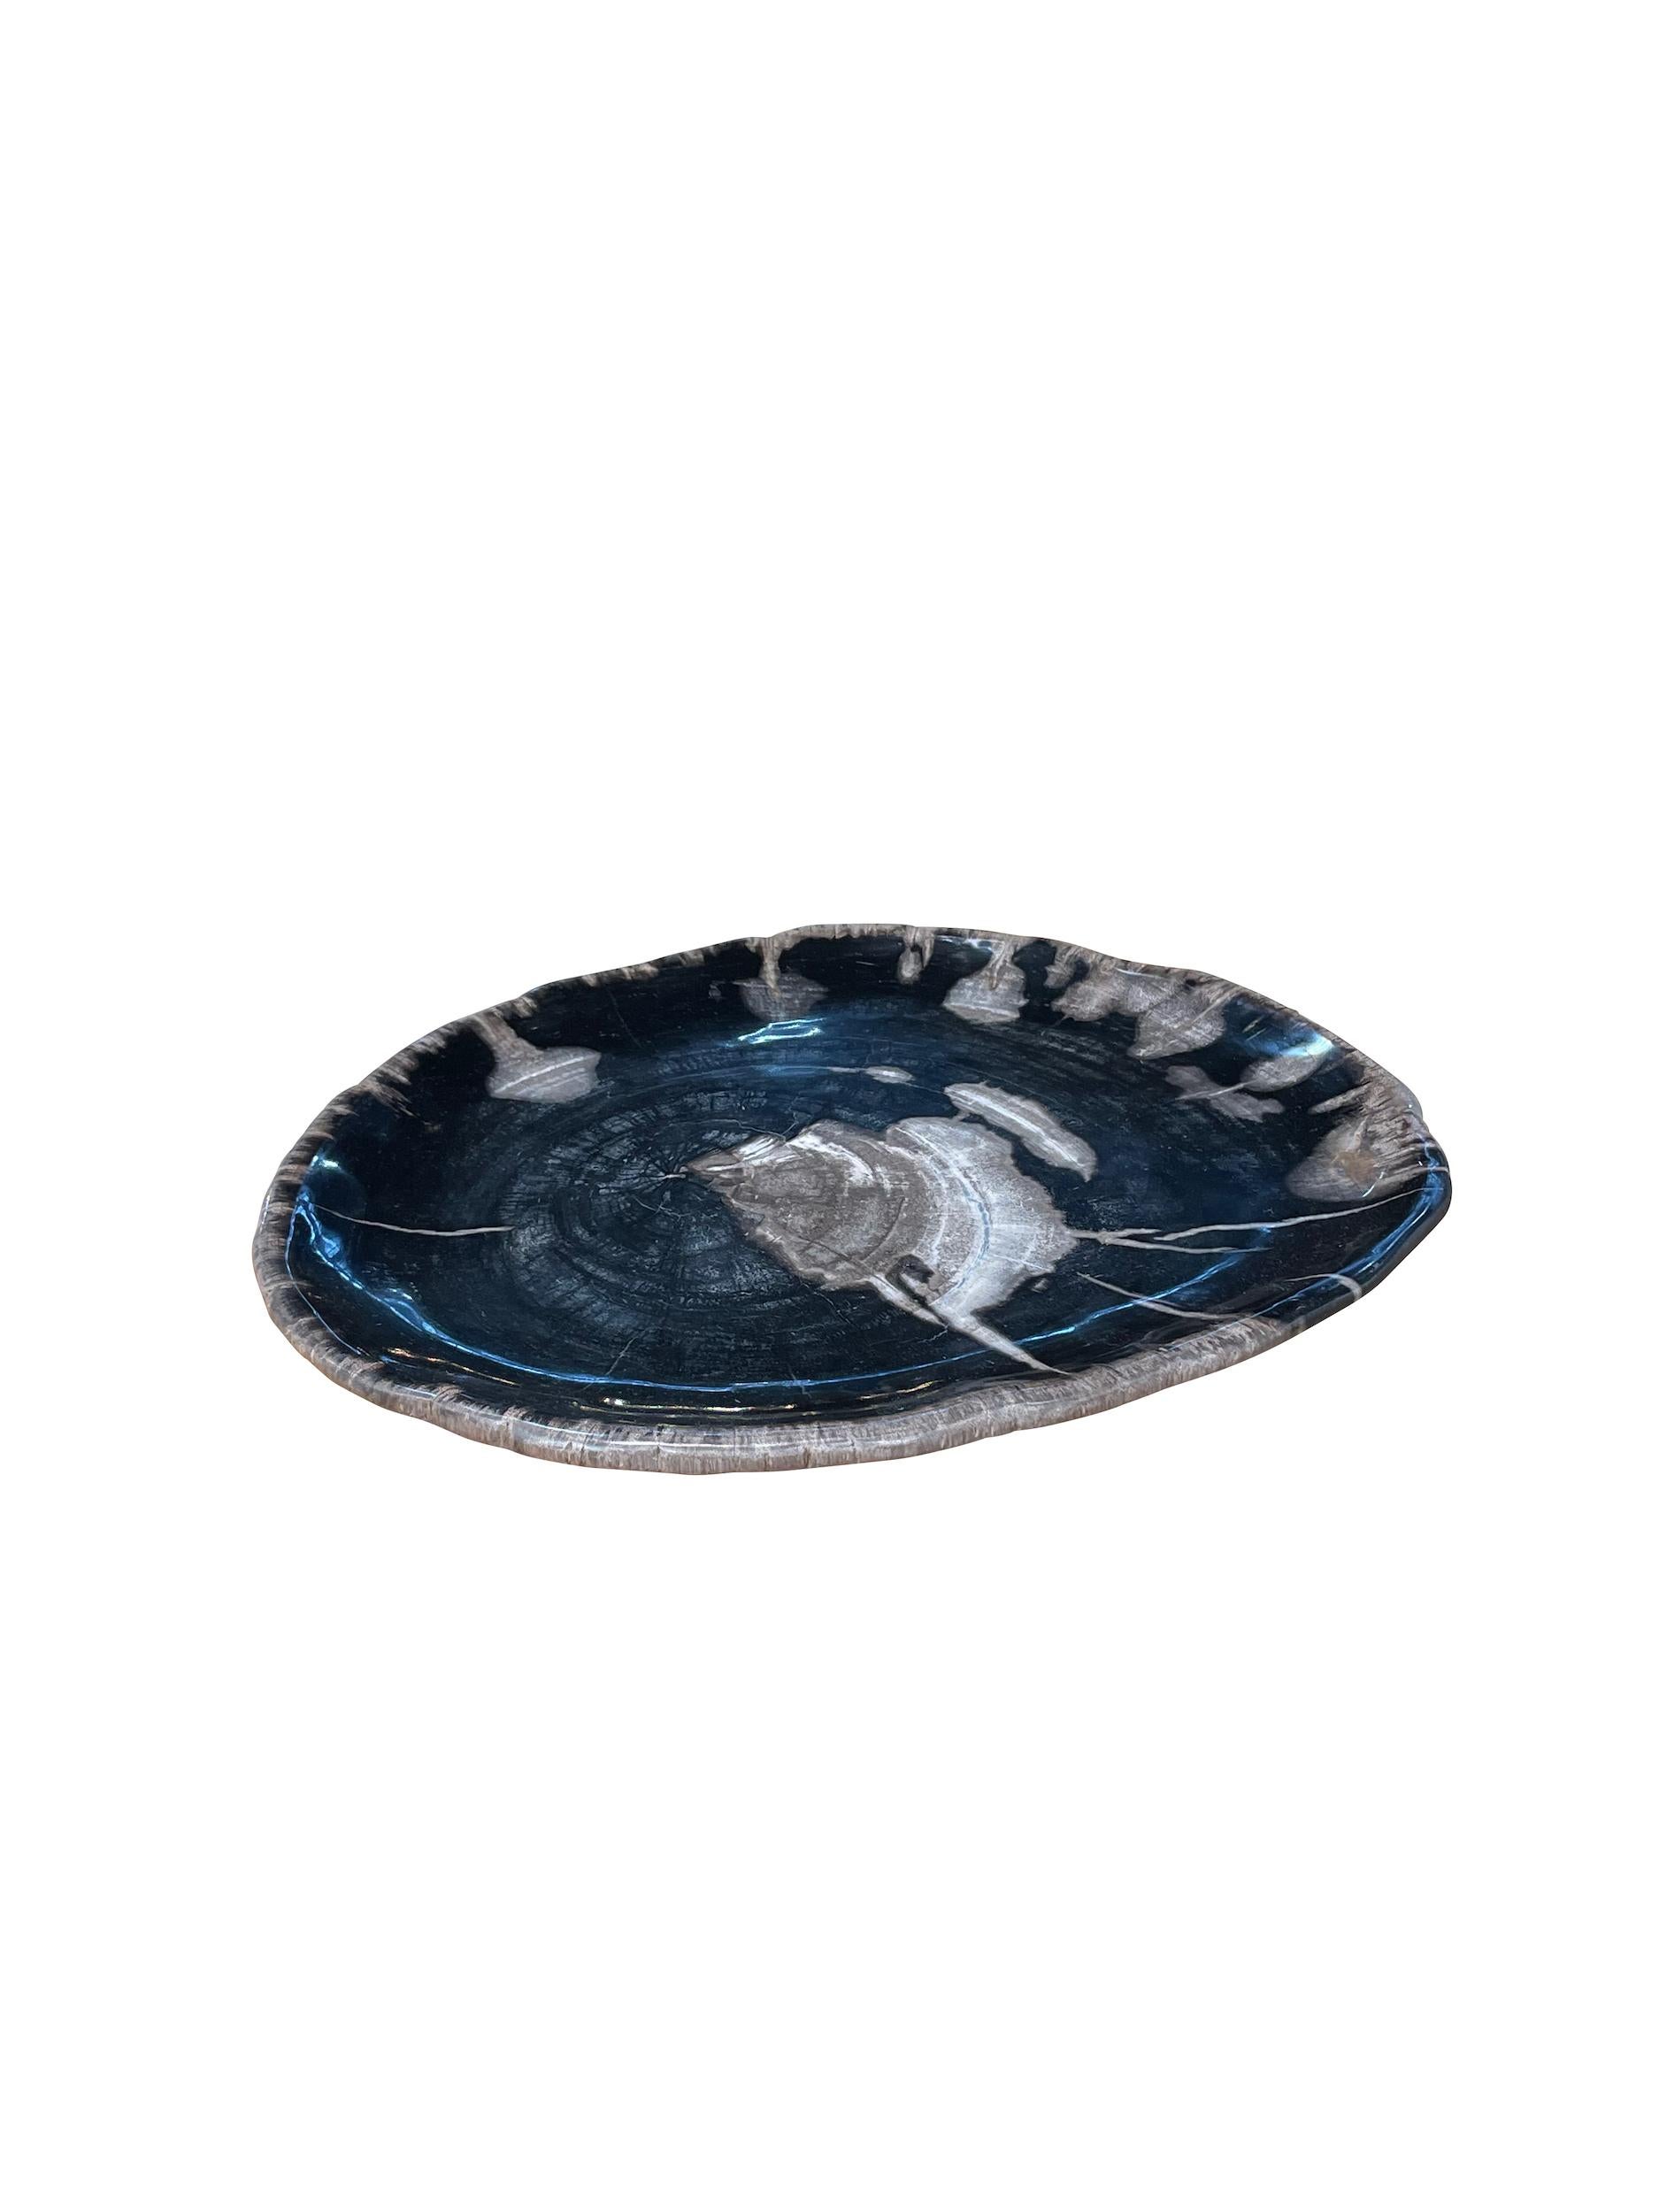 Contemporary Indonesian petrified wood plate.
Primarily black in color.
Free form in shape.
From a large collection of bowls, platters and plates.